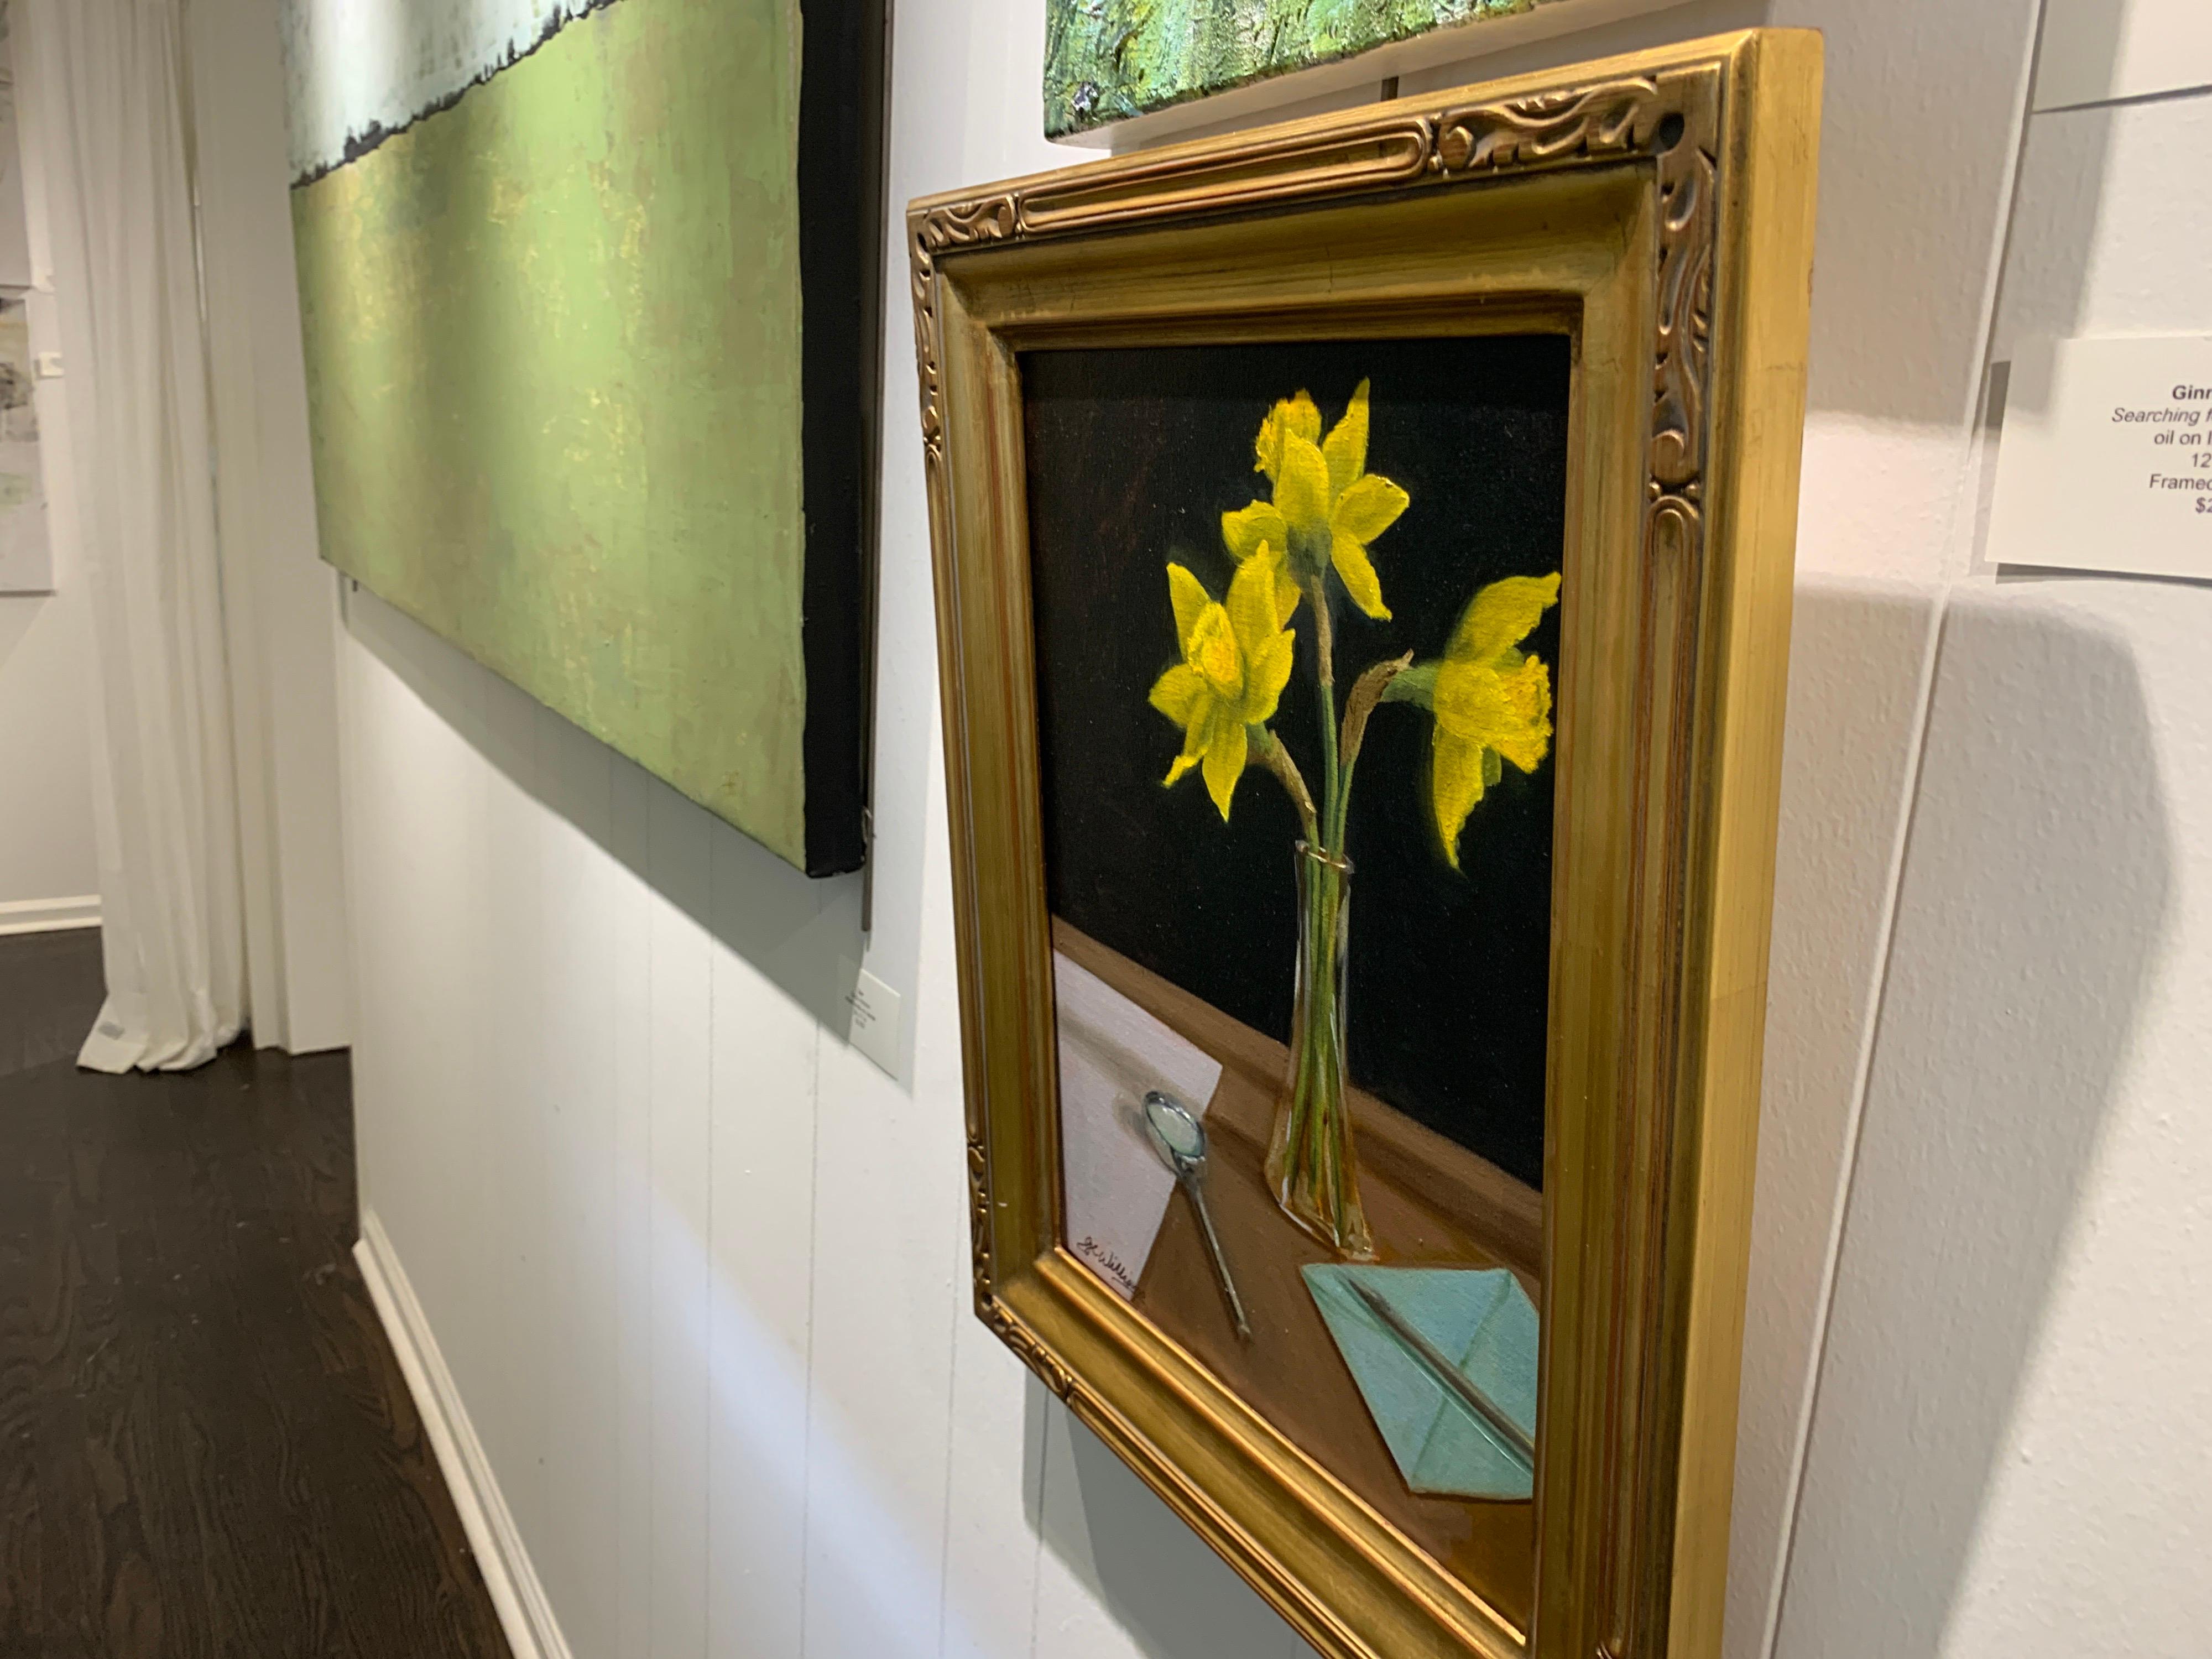 Searching for Signs of Spring by Ginny Williams, Framed Realist Painting 3